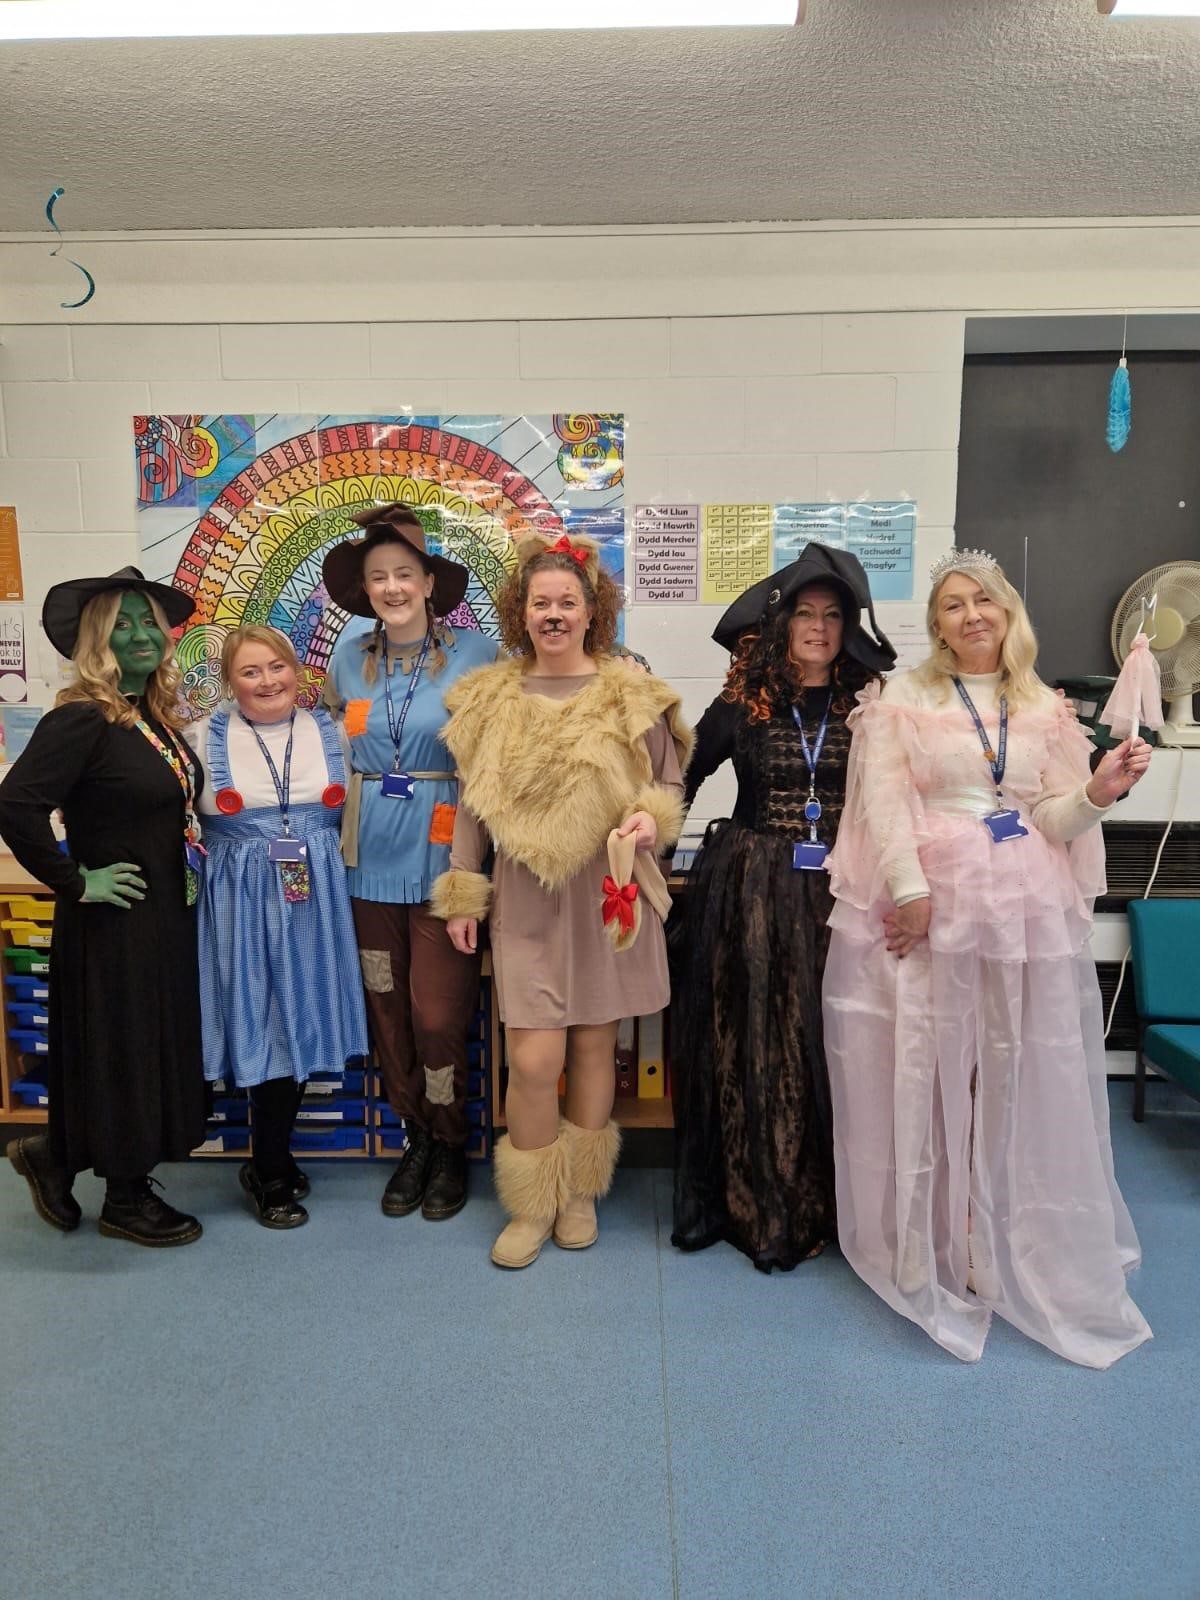 World Book Day at Argoed High School, with Wizard of Oz characters.